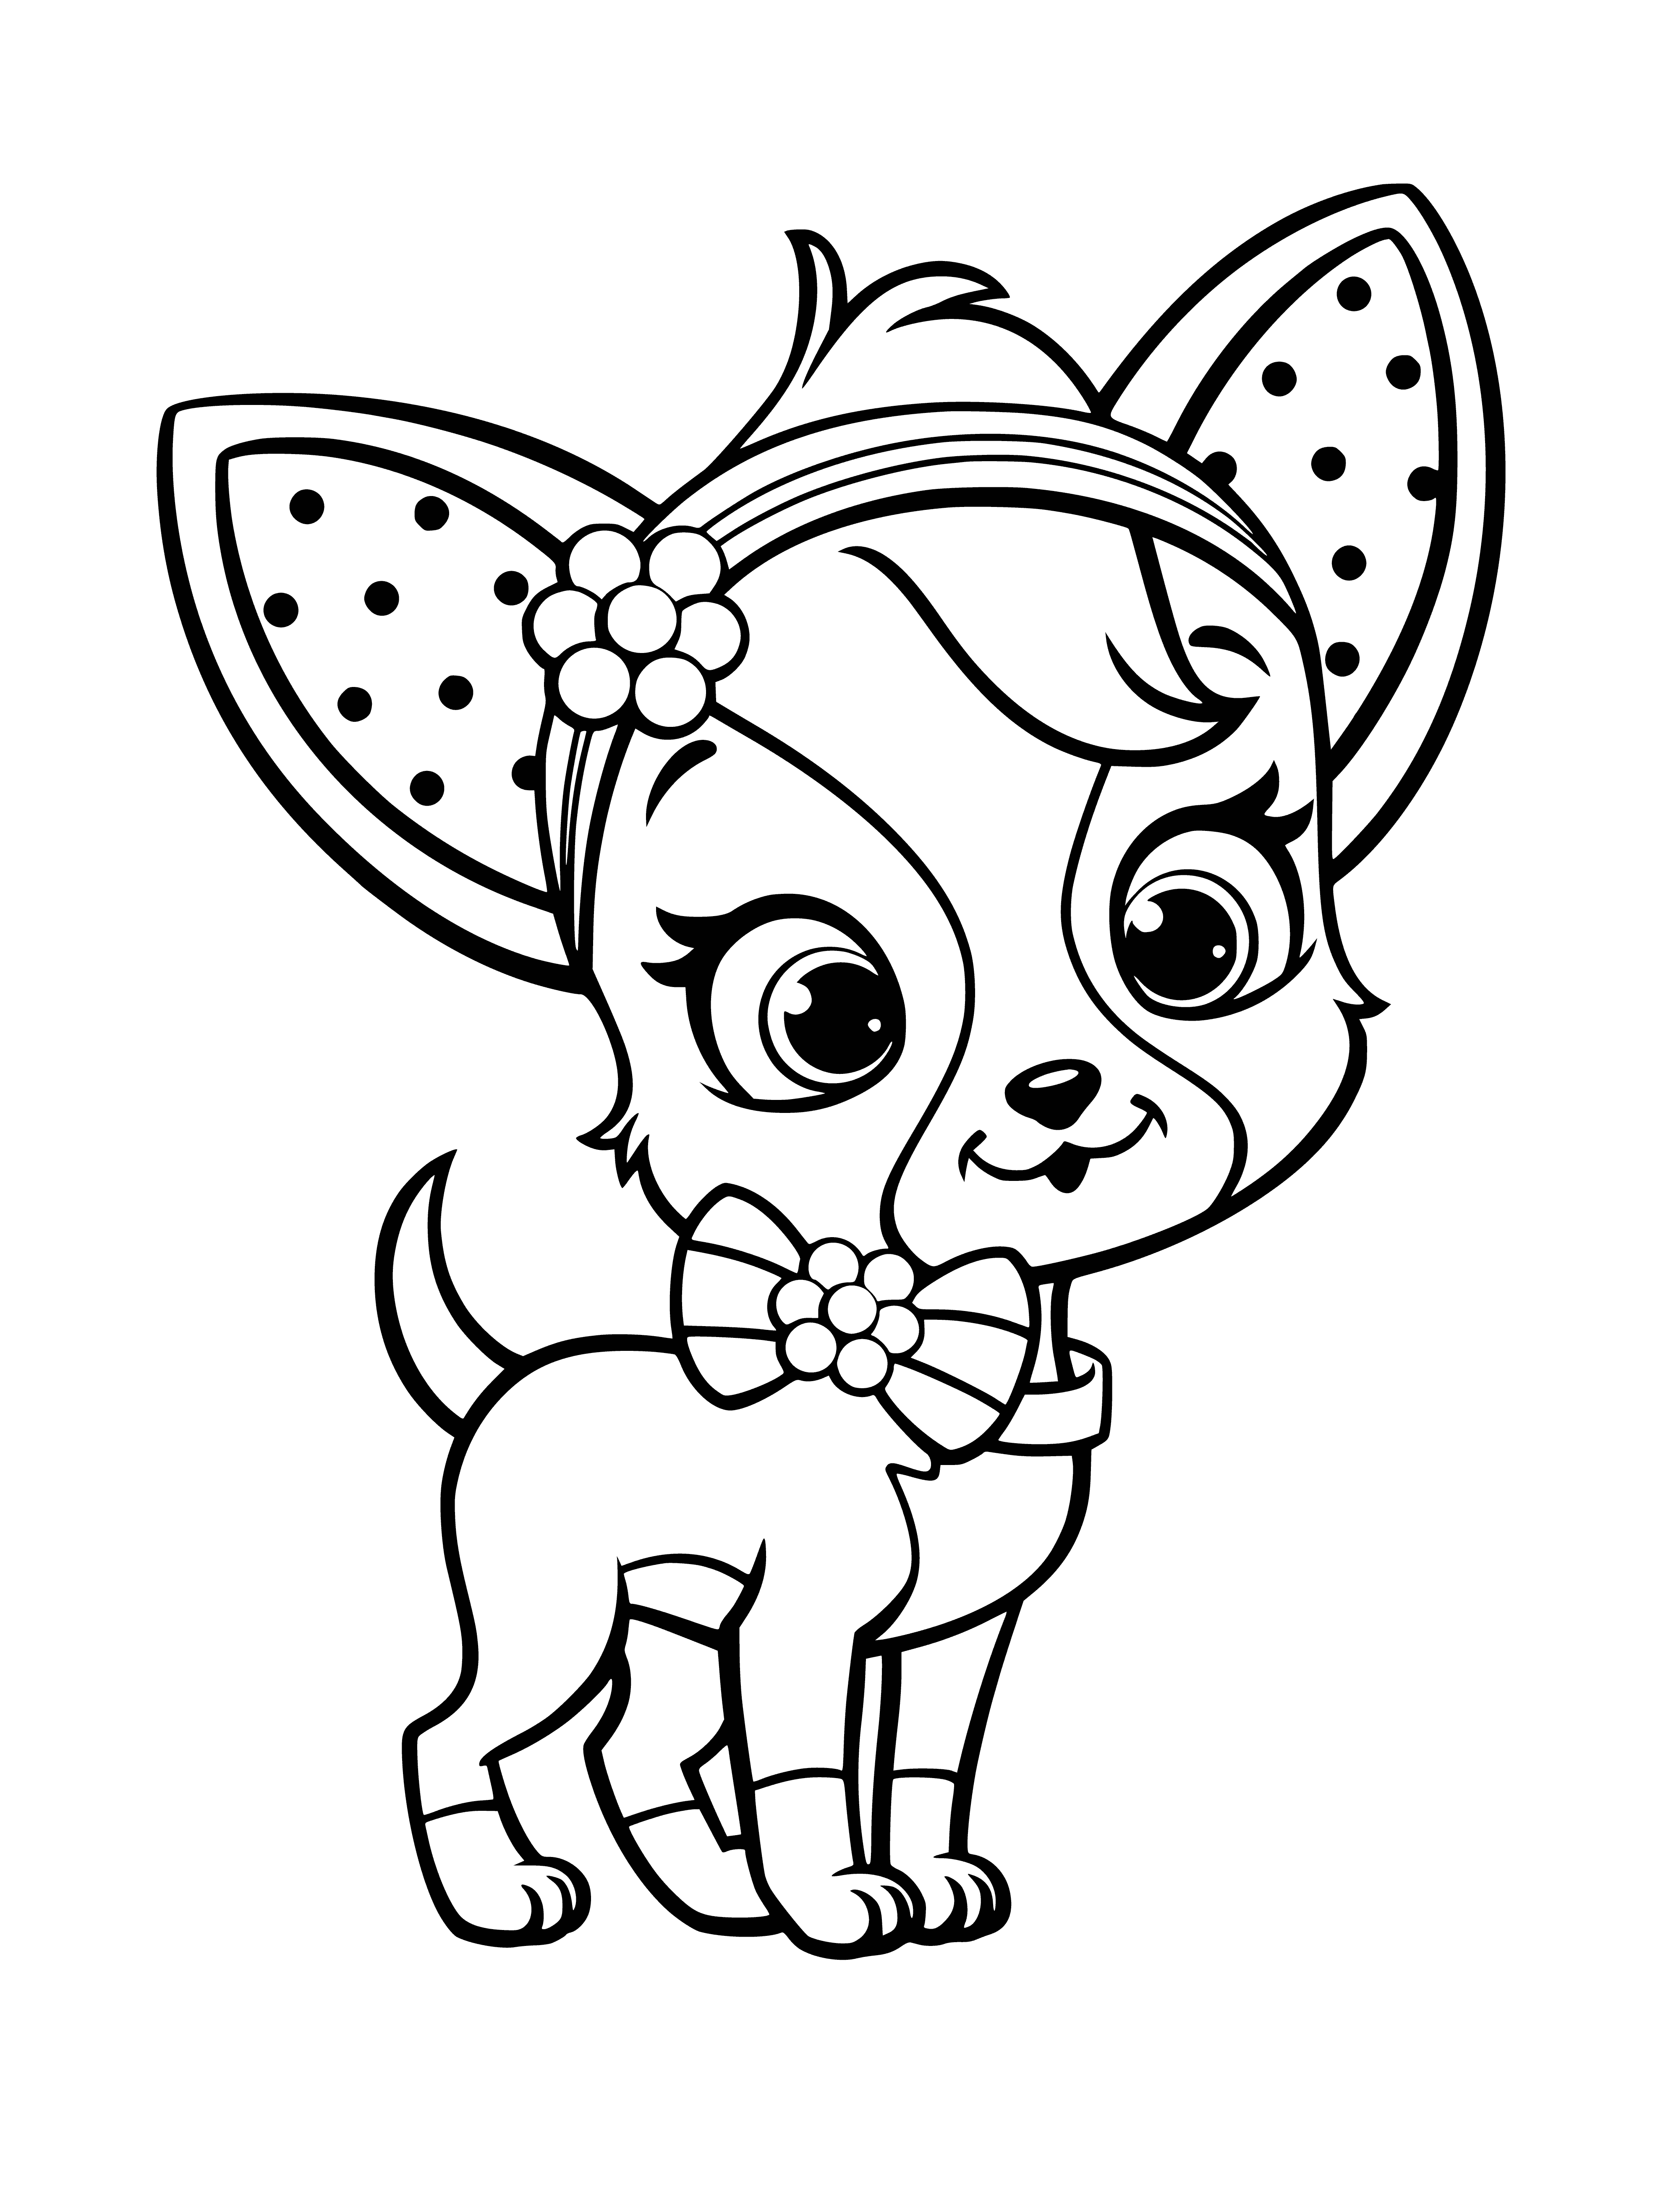 coloring page: Close-up coloring page of short-furred Chihuahua with big eyes, perked ears, and black collar. #coloringpage #dog